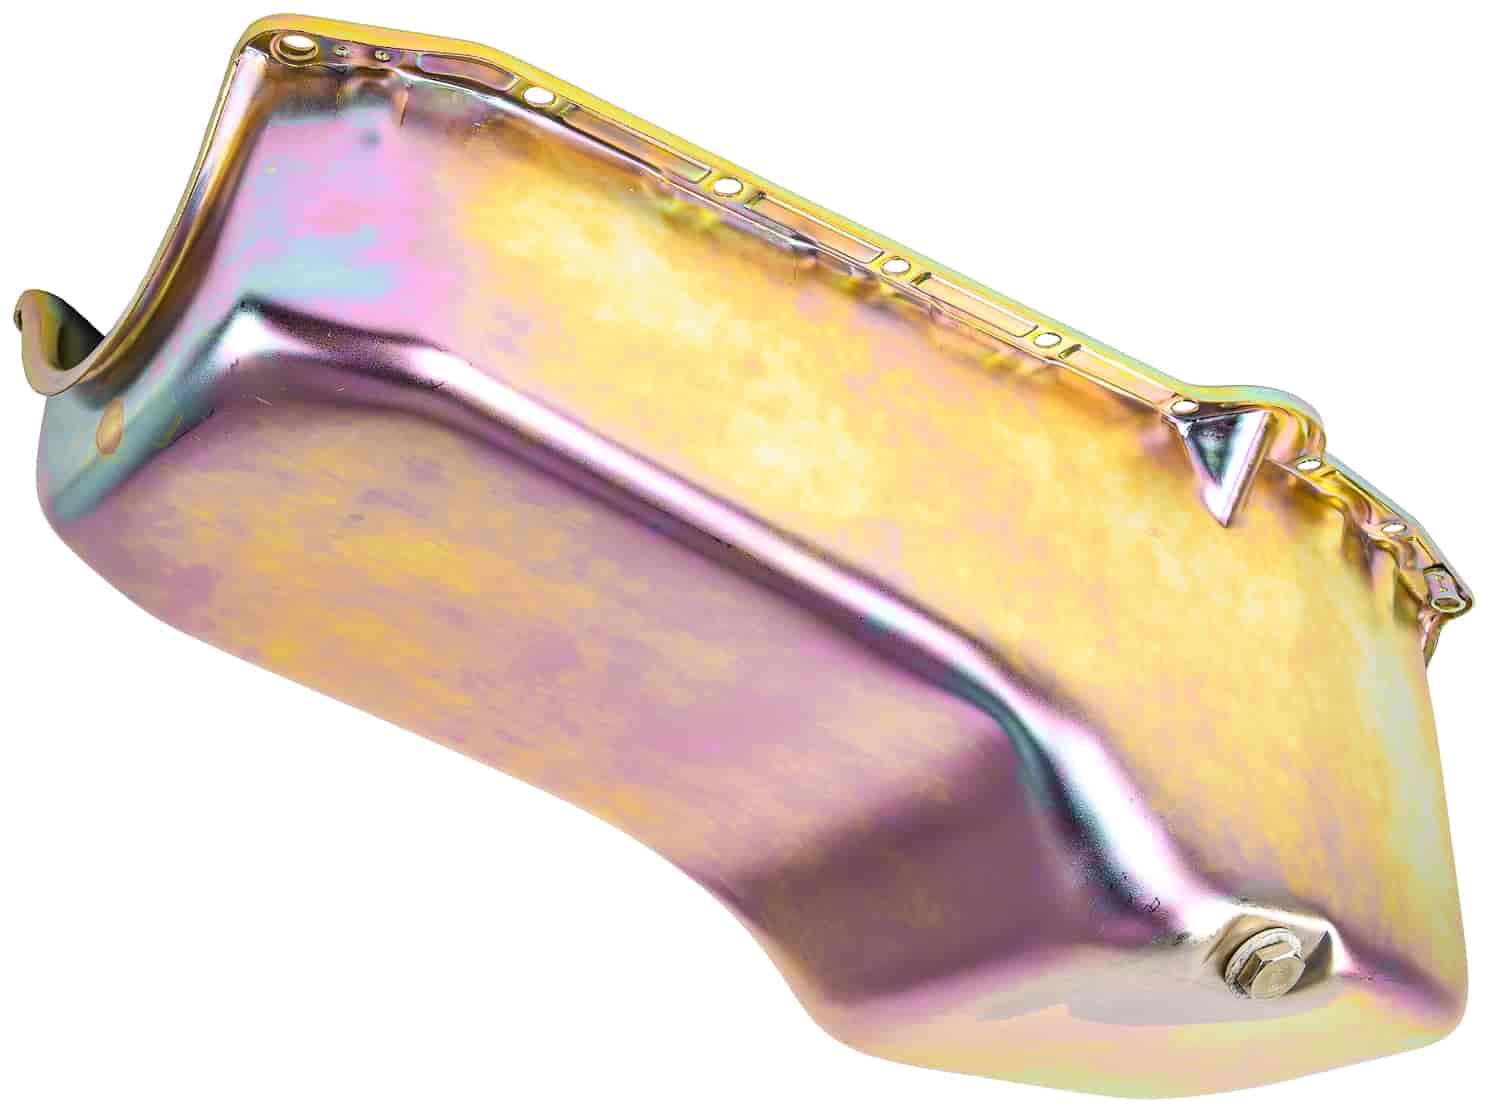 Stock Replacement Oil Pan for 1955-1979 Small Block Chevy w/Left Hand Dip Stick [Gold Zinc]